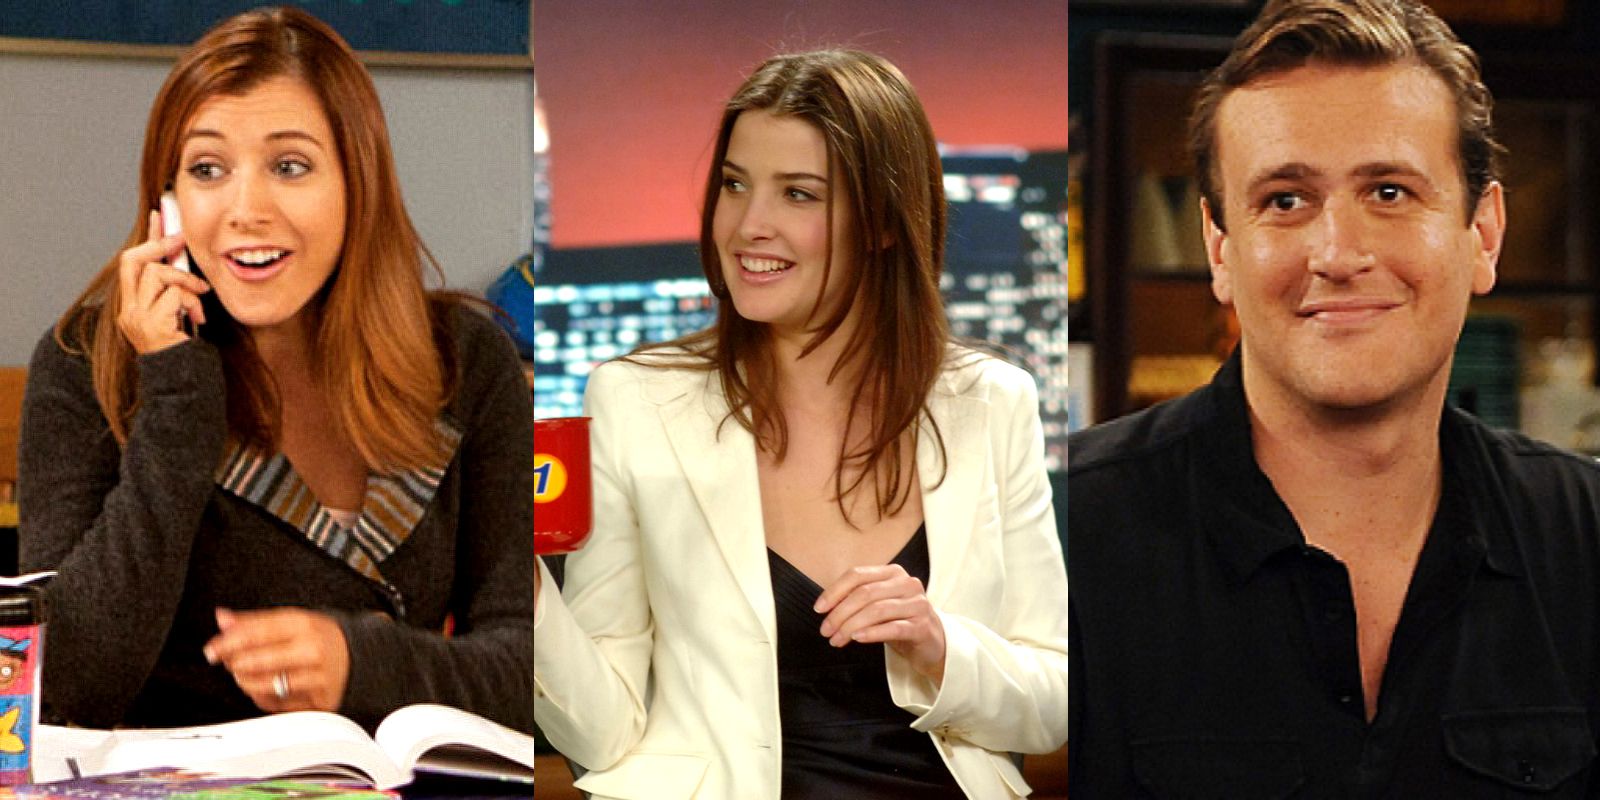 Split image: Lily, Robin and Marshall each smiling in scenes from How I Met Your Mother